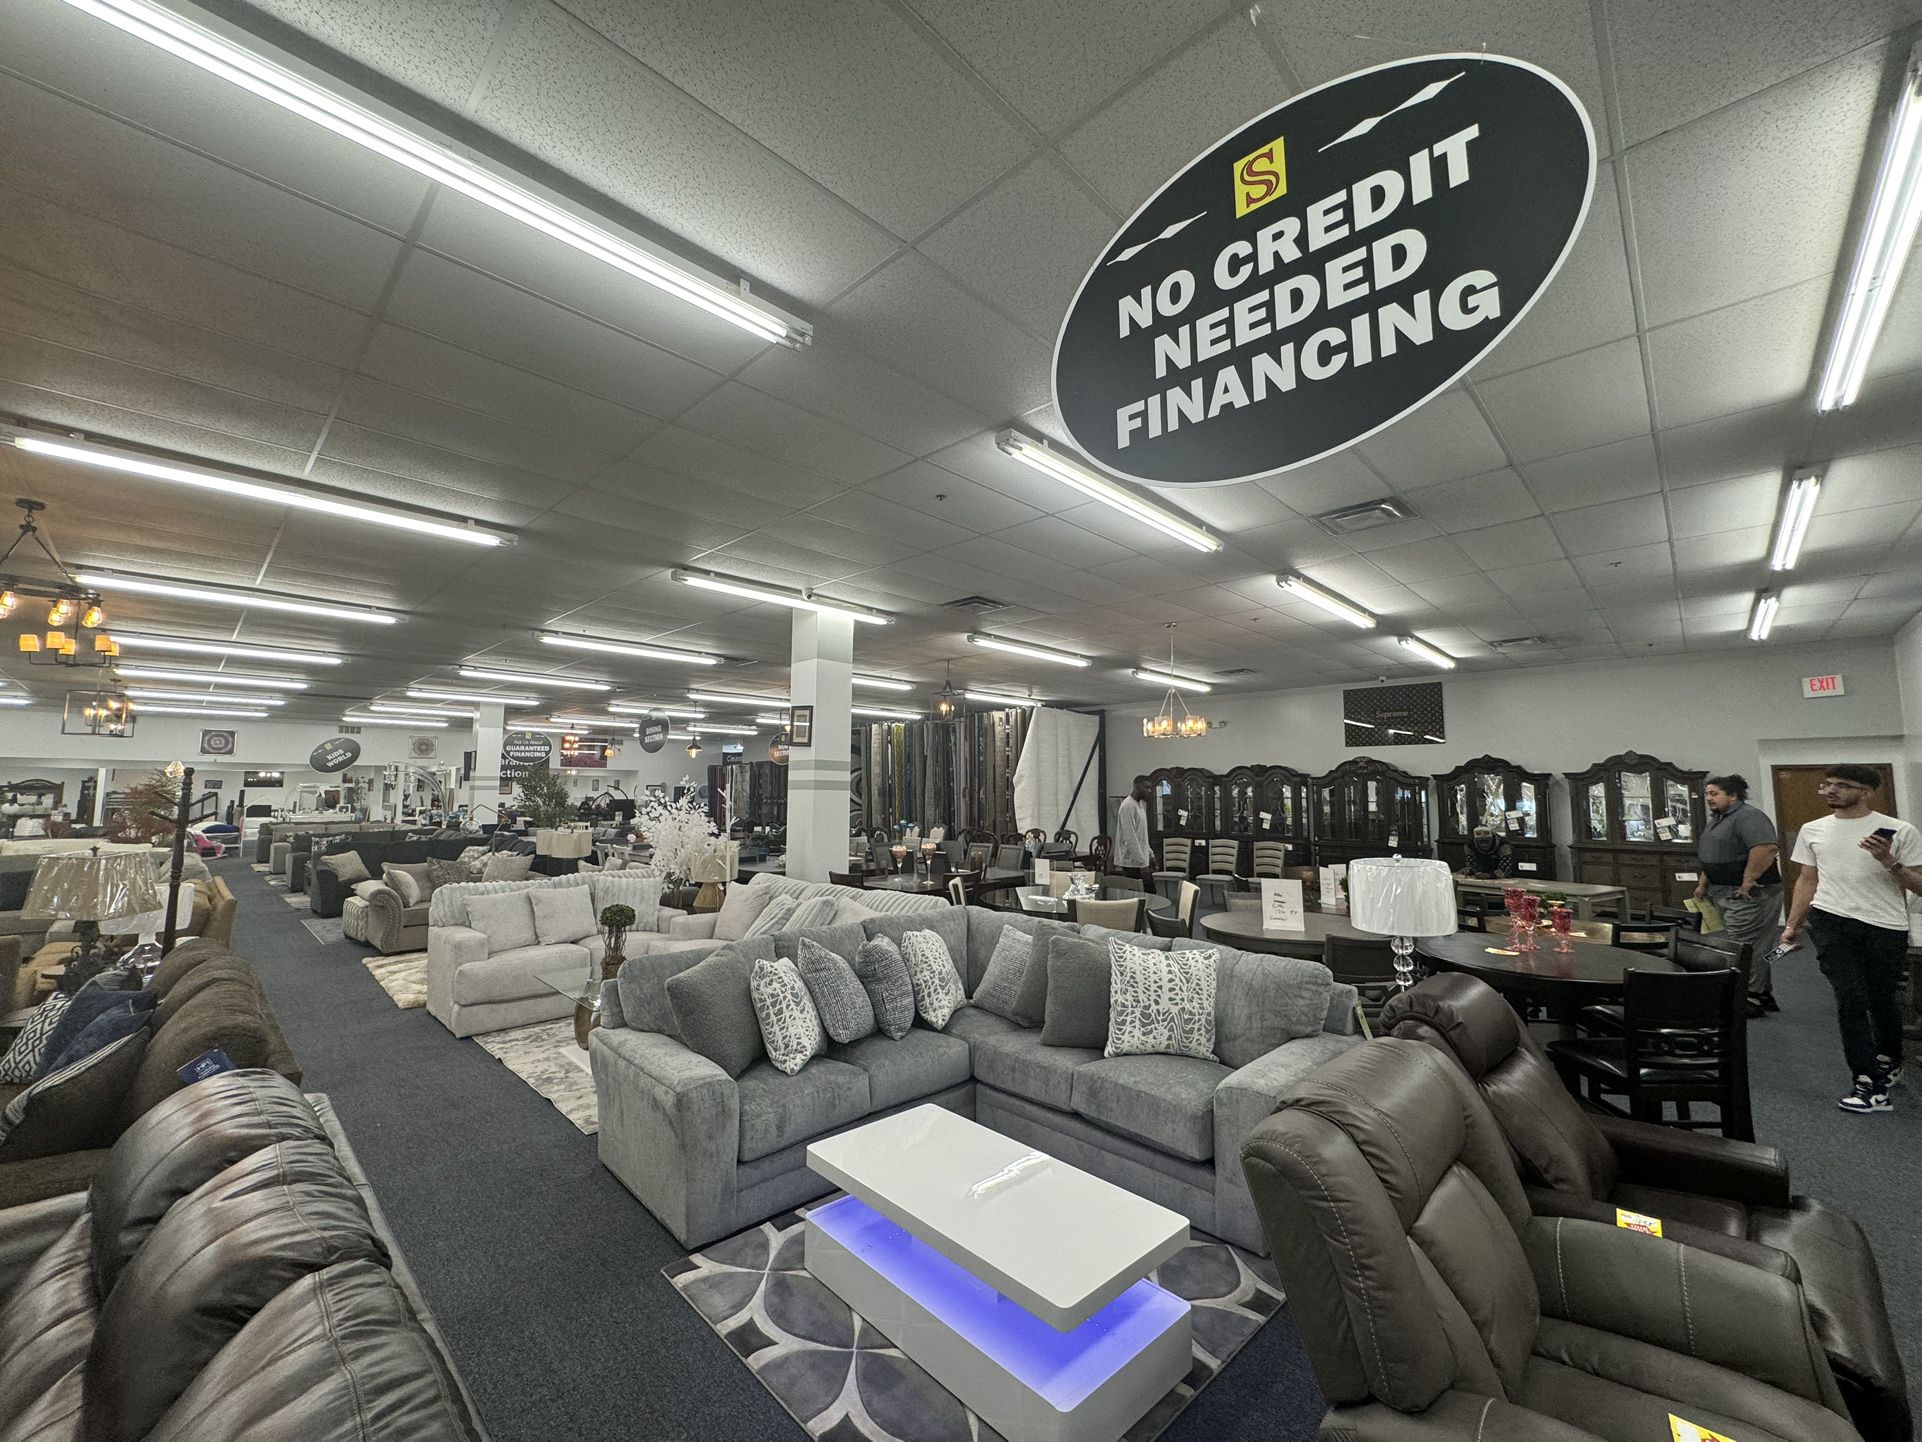 Memory Foam Sectional 1799 furniture mattress appliance 0-99 down no credit needed no intrest financing available deals 